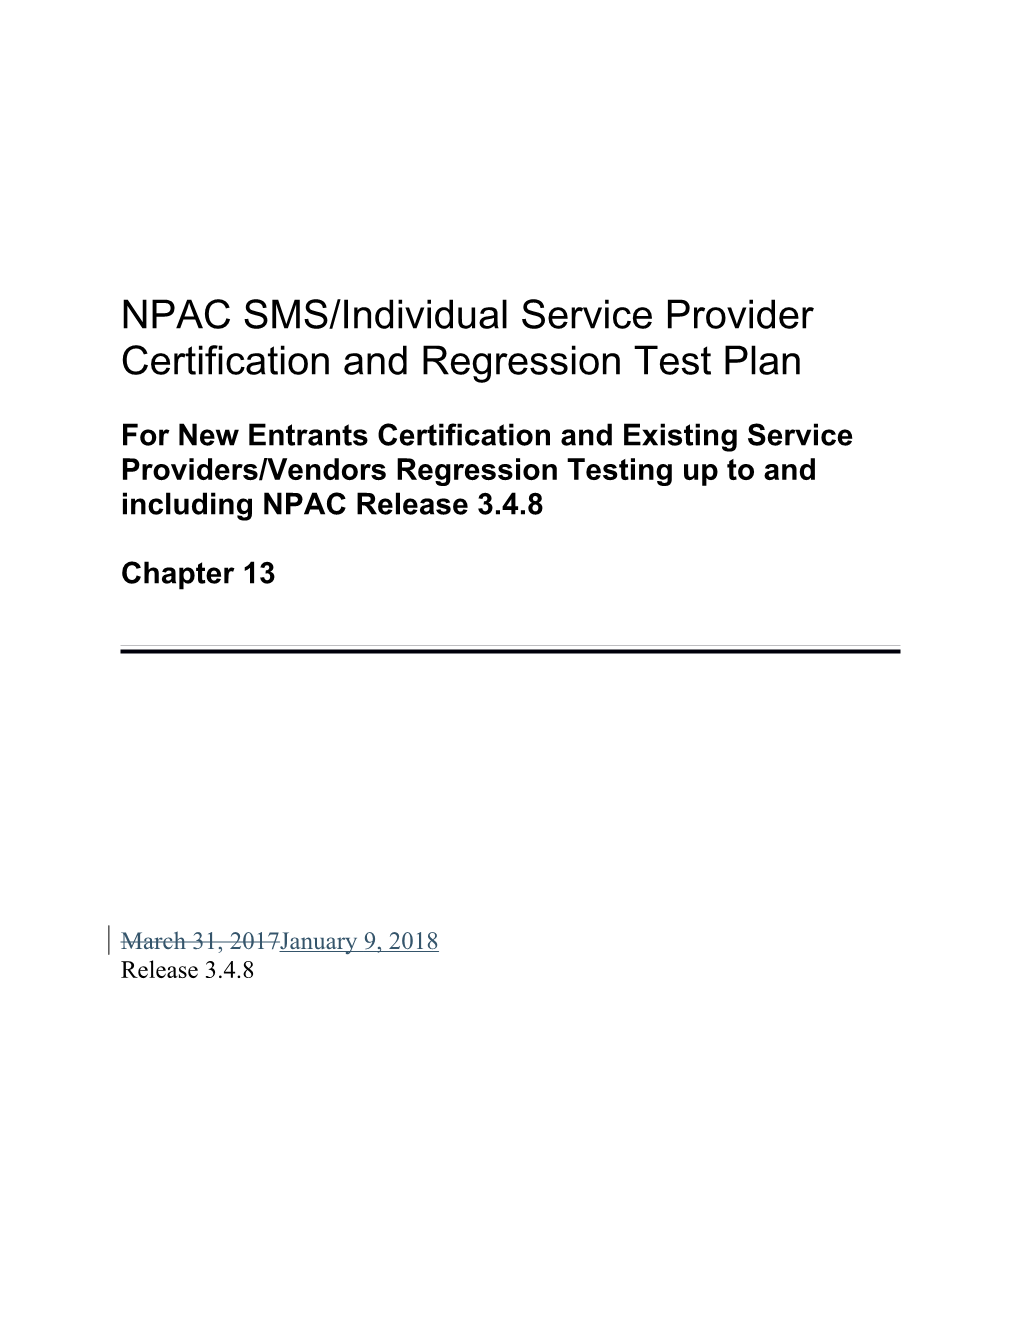 NPAC SMS/Individual Service Provider Certification and Regression Test Plan, Chapter 13